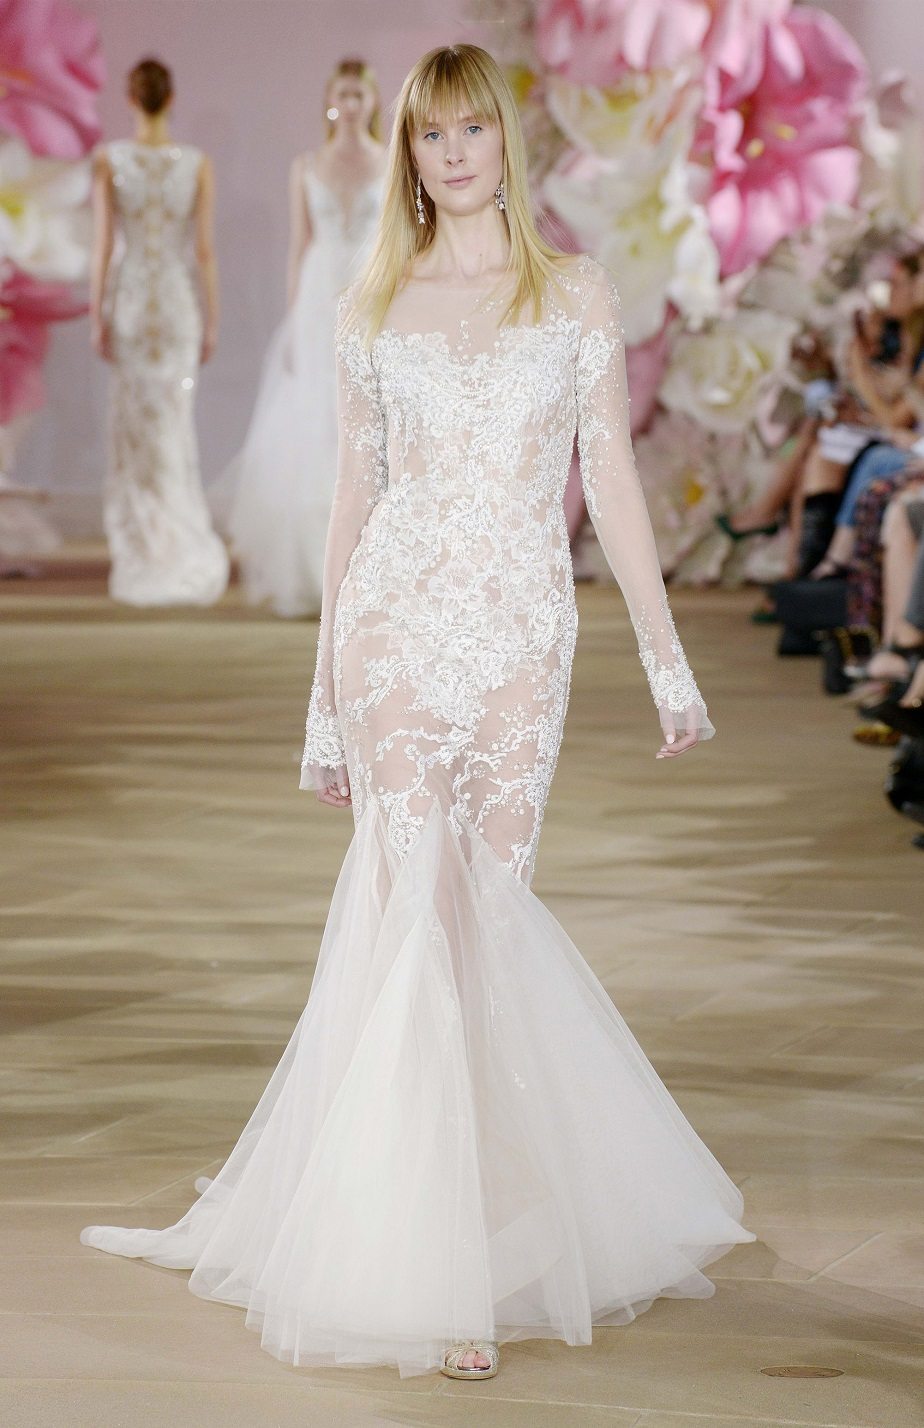 Ines Di Santo Wedding Gowns Will Make You Weak At the Knees ...